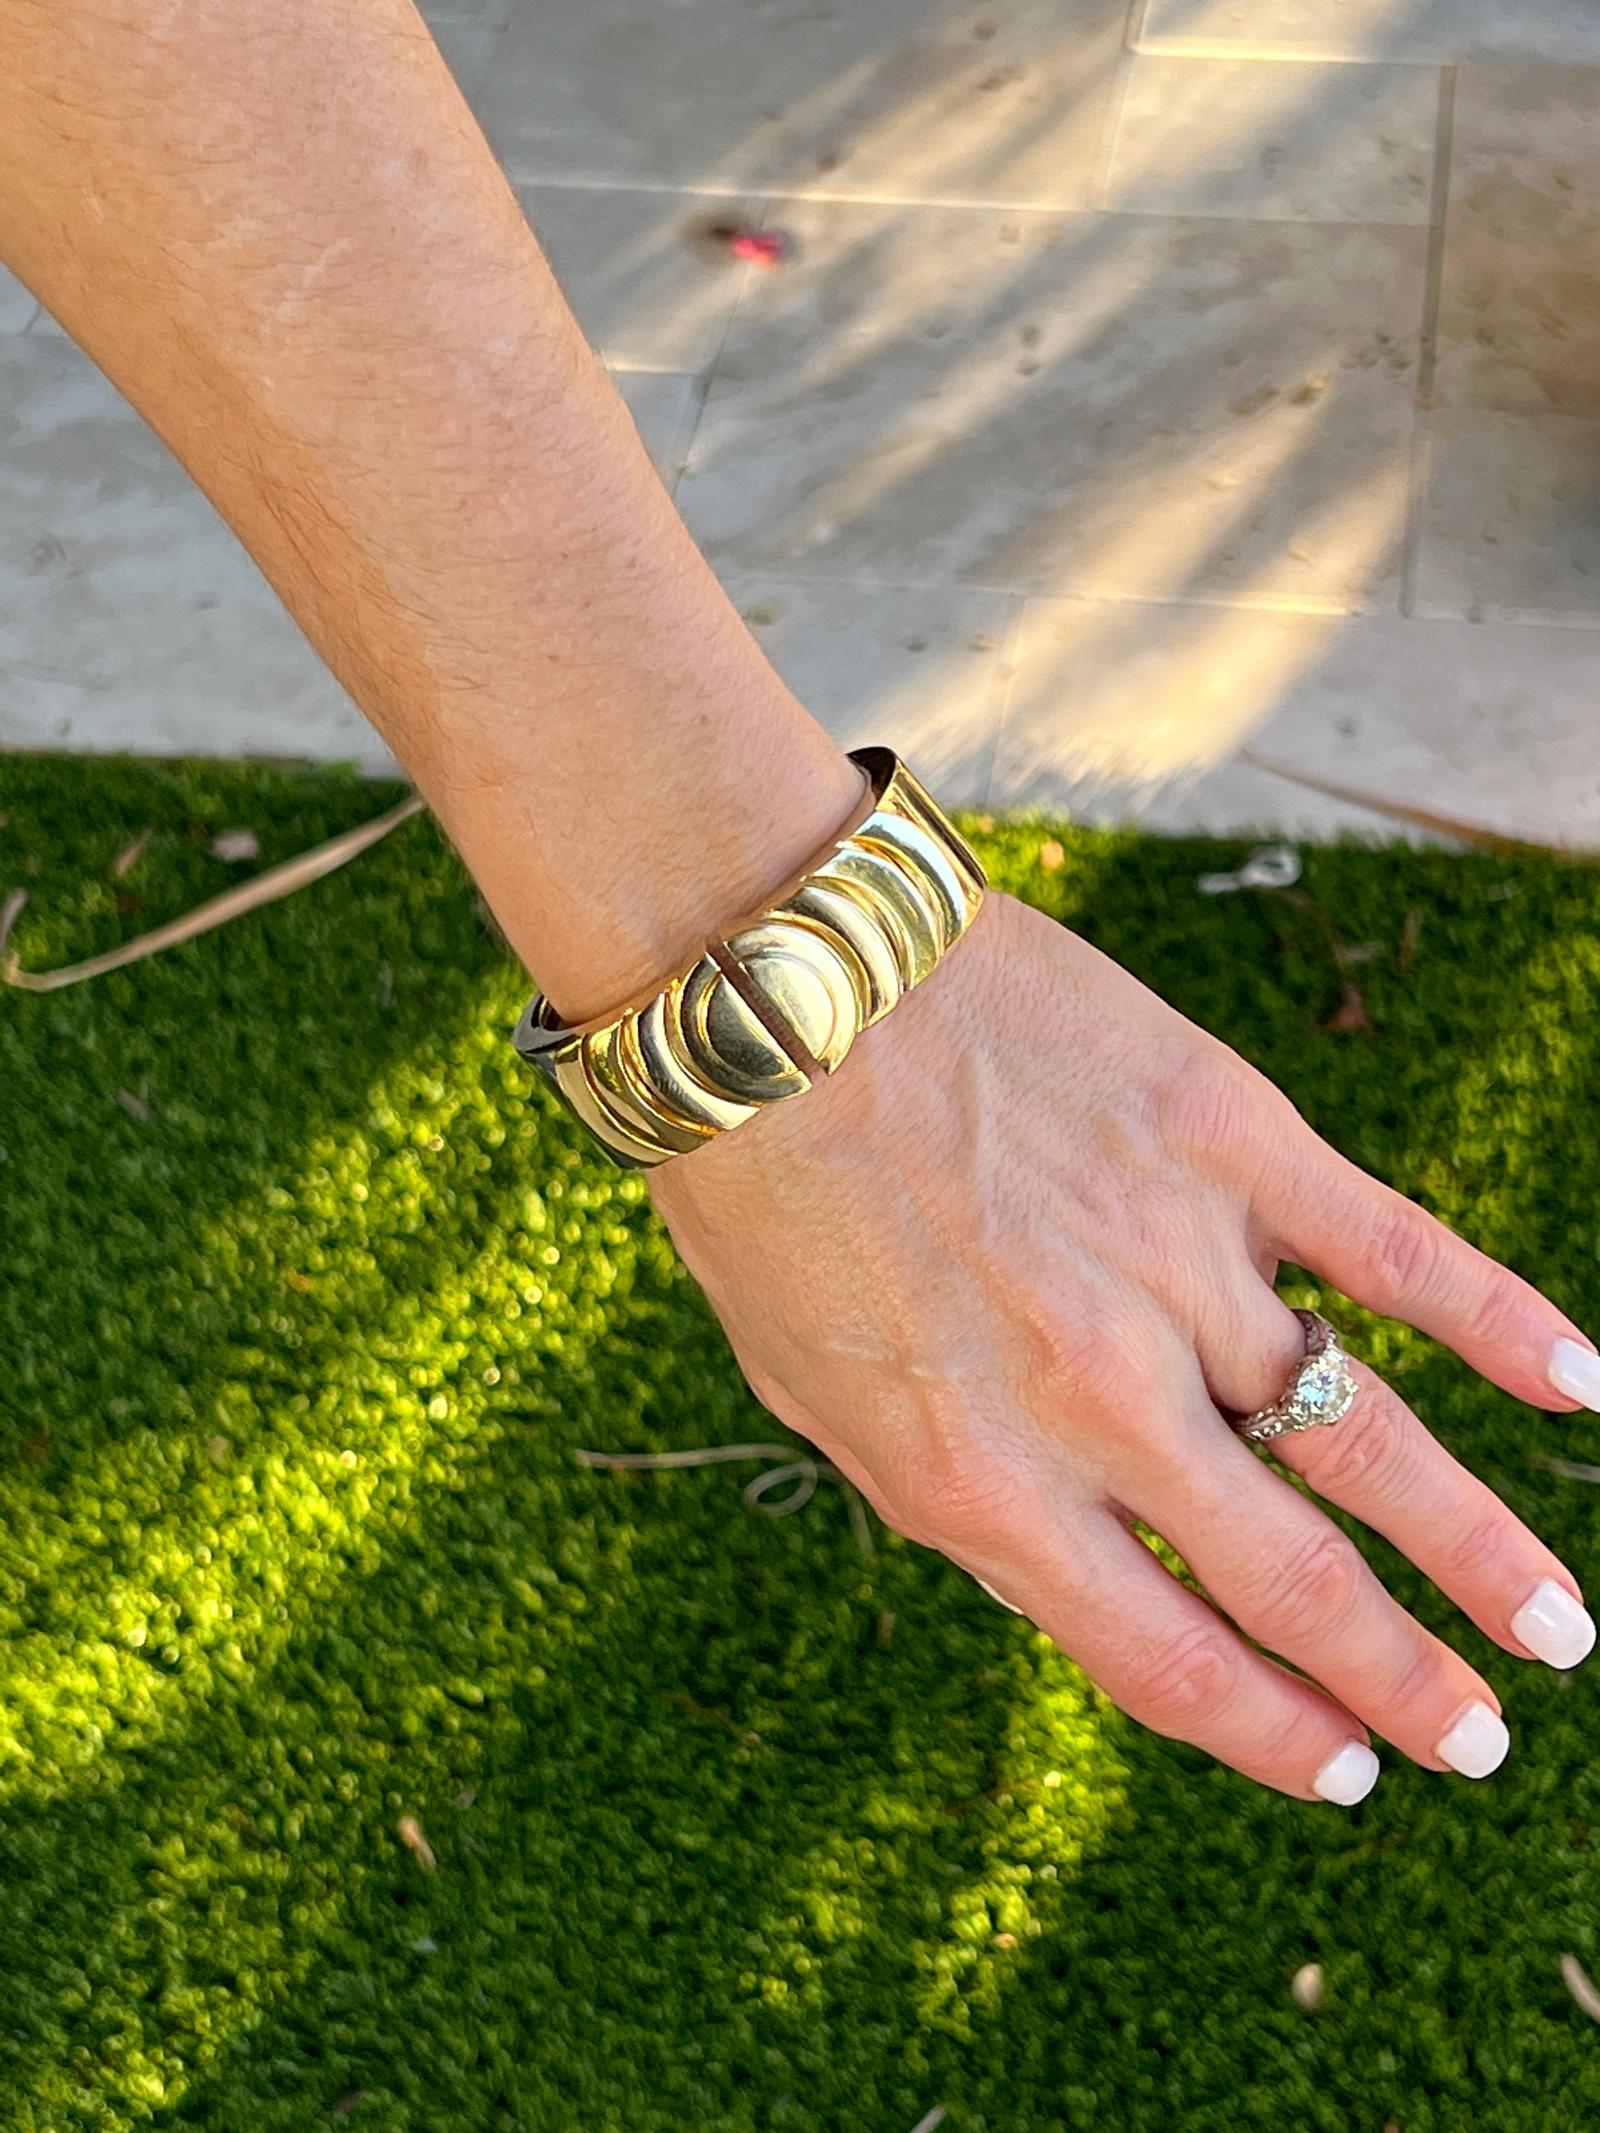 Modern David Webb hinged bangle bracelet fashioned in 18 karat yellow gold. The bracelet features circular endcaps and is hinged for easy wear. the bracelet measures 2.25 inches in internal diameter, .90 inches in width, and will fit 6.5 - 7.0 inch